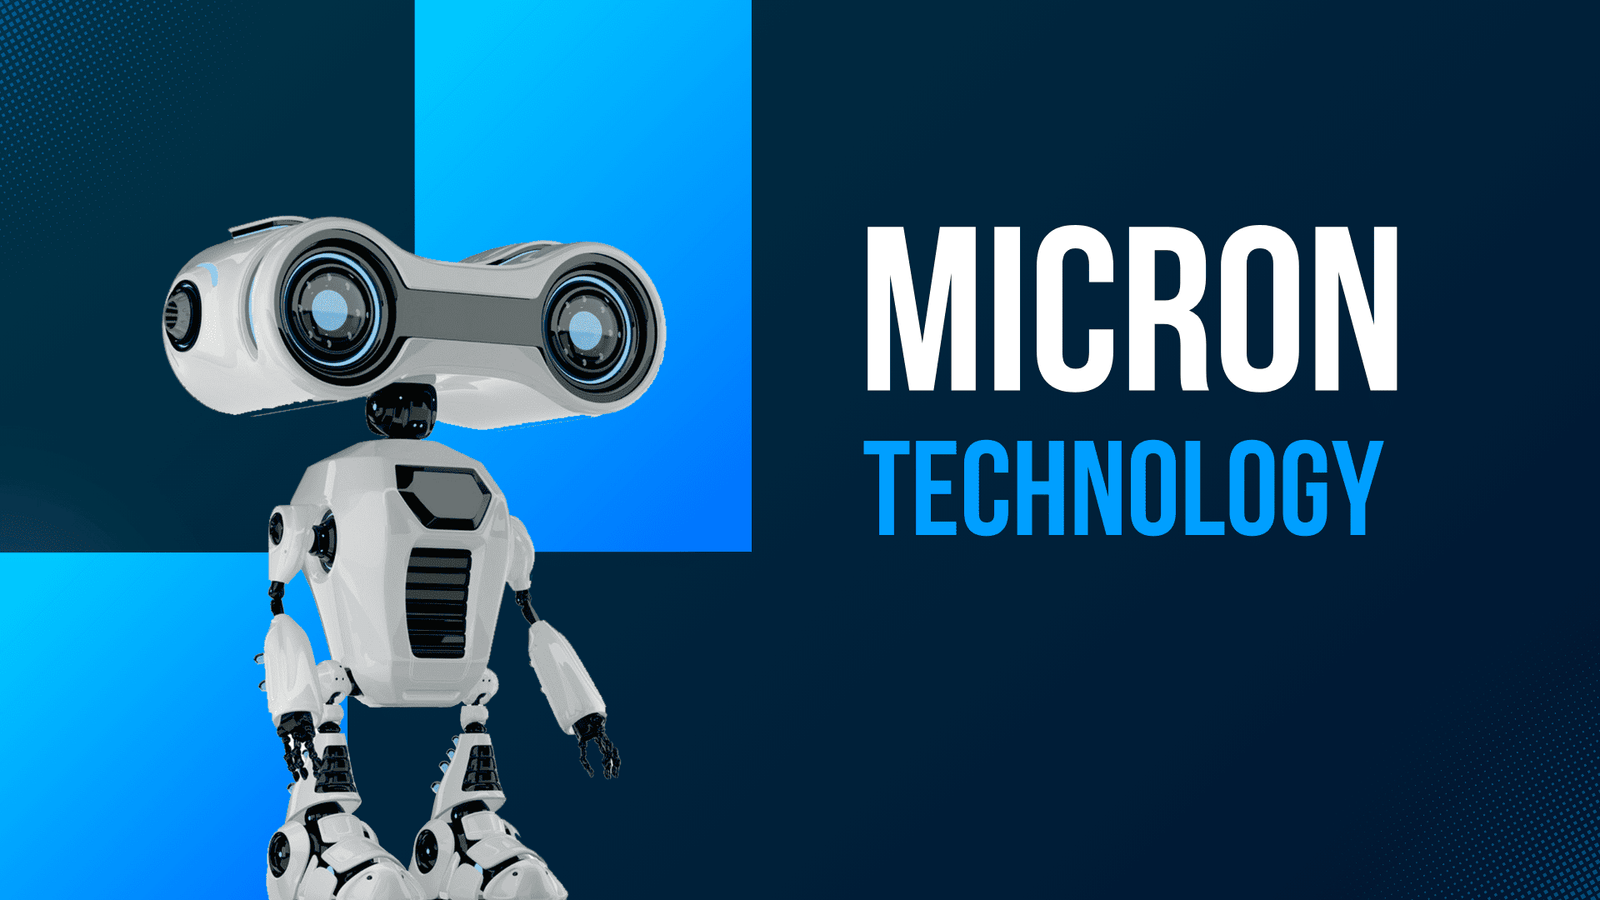 Micron technology is an American semiconductor company that is best known for manufacturing computer data storage and memory products